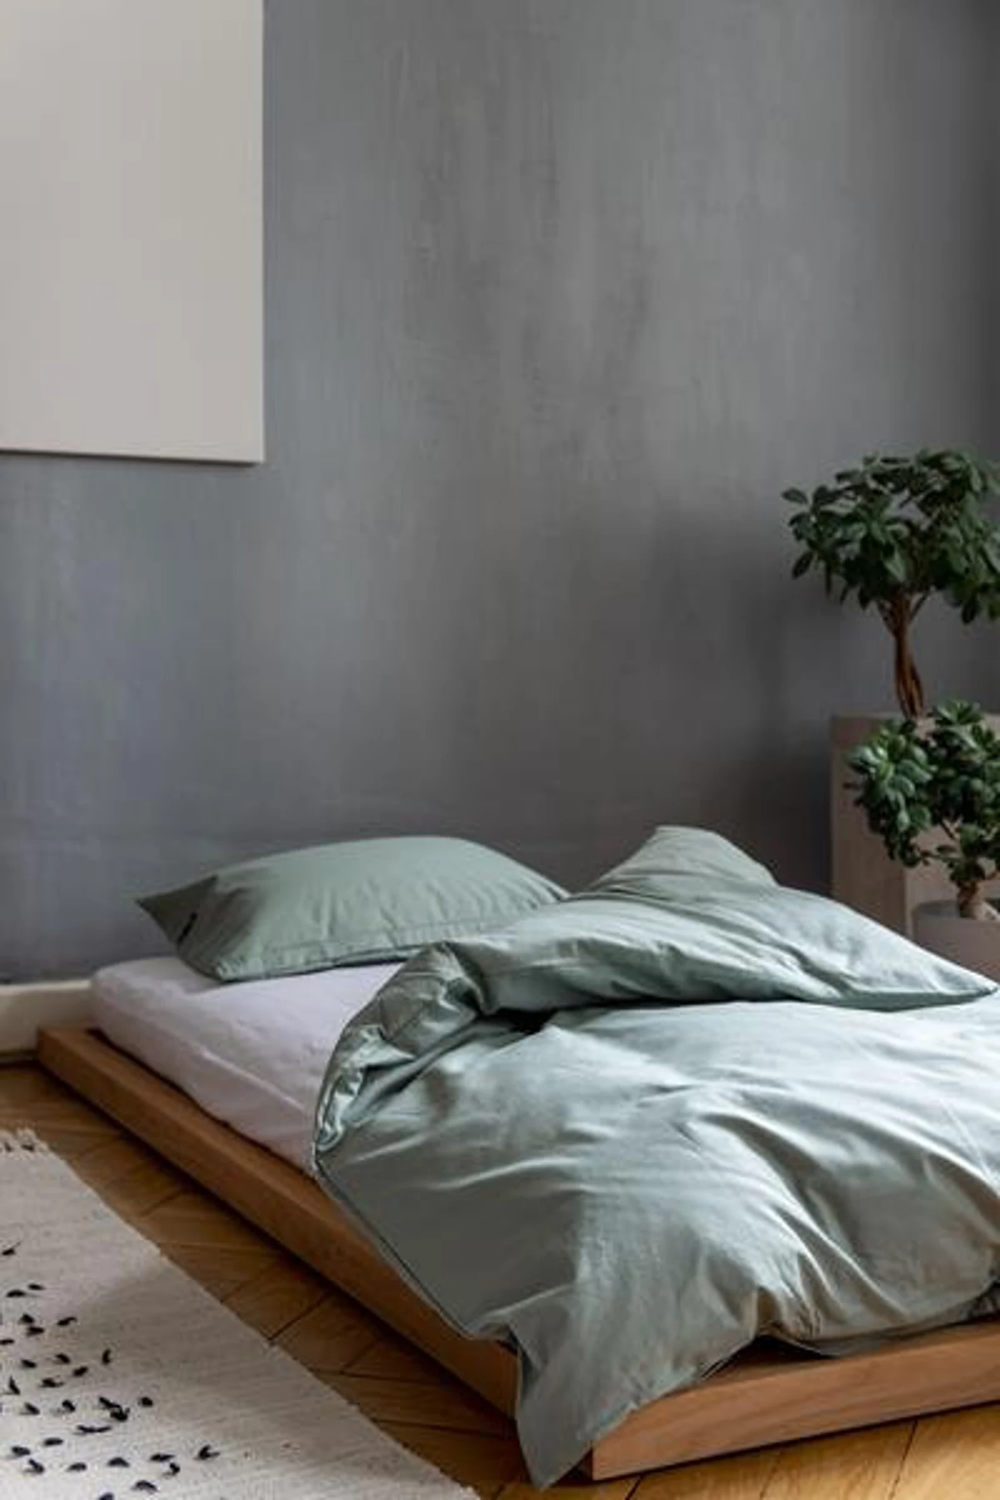 Upgrade Your Bedroom with Low Bed Designs